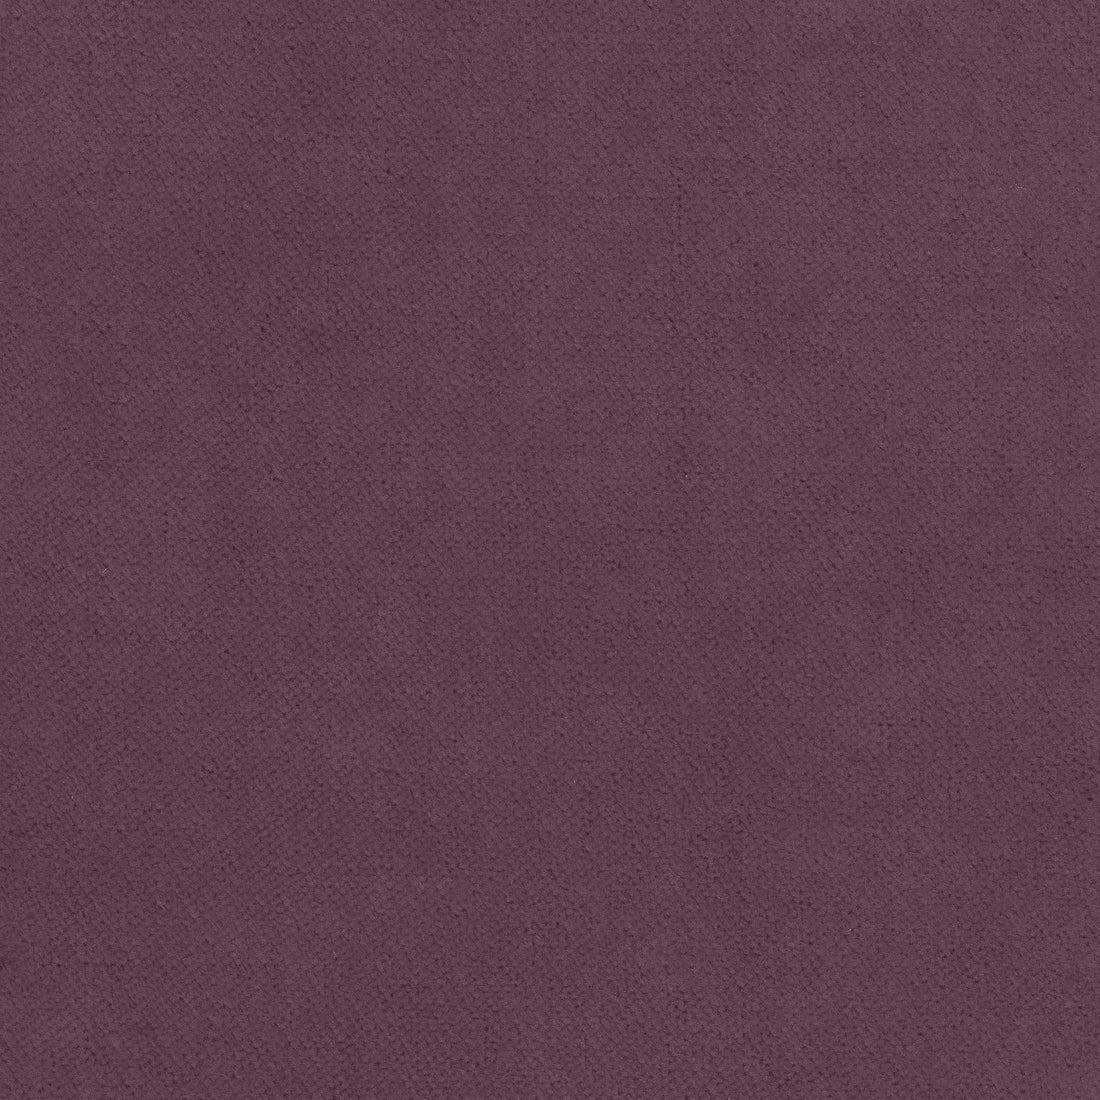 Club Velvet fabric in mulberry color - pattern number W7213 - by Thibaut in the Club Velvet collection